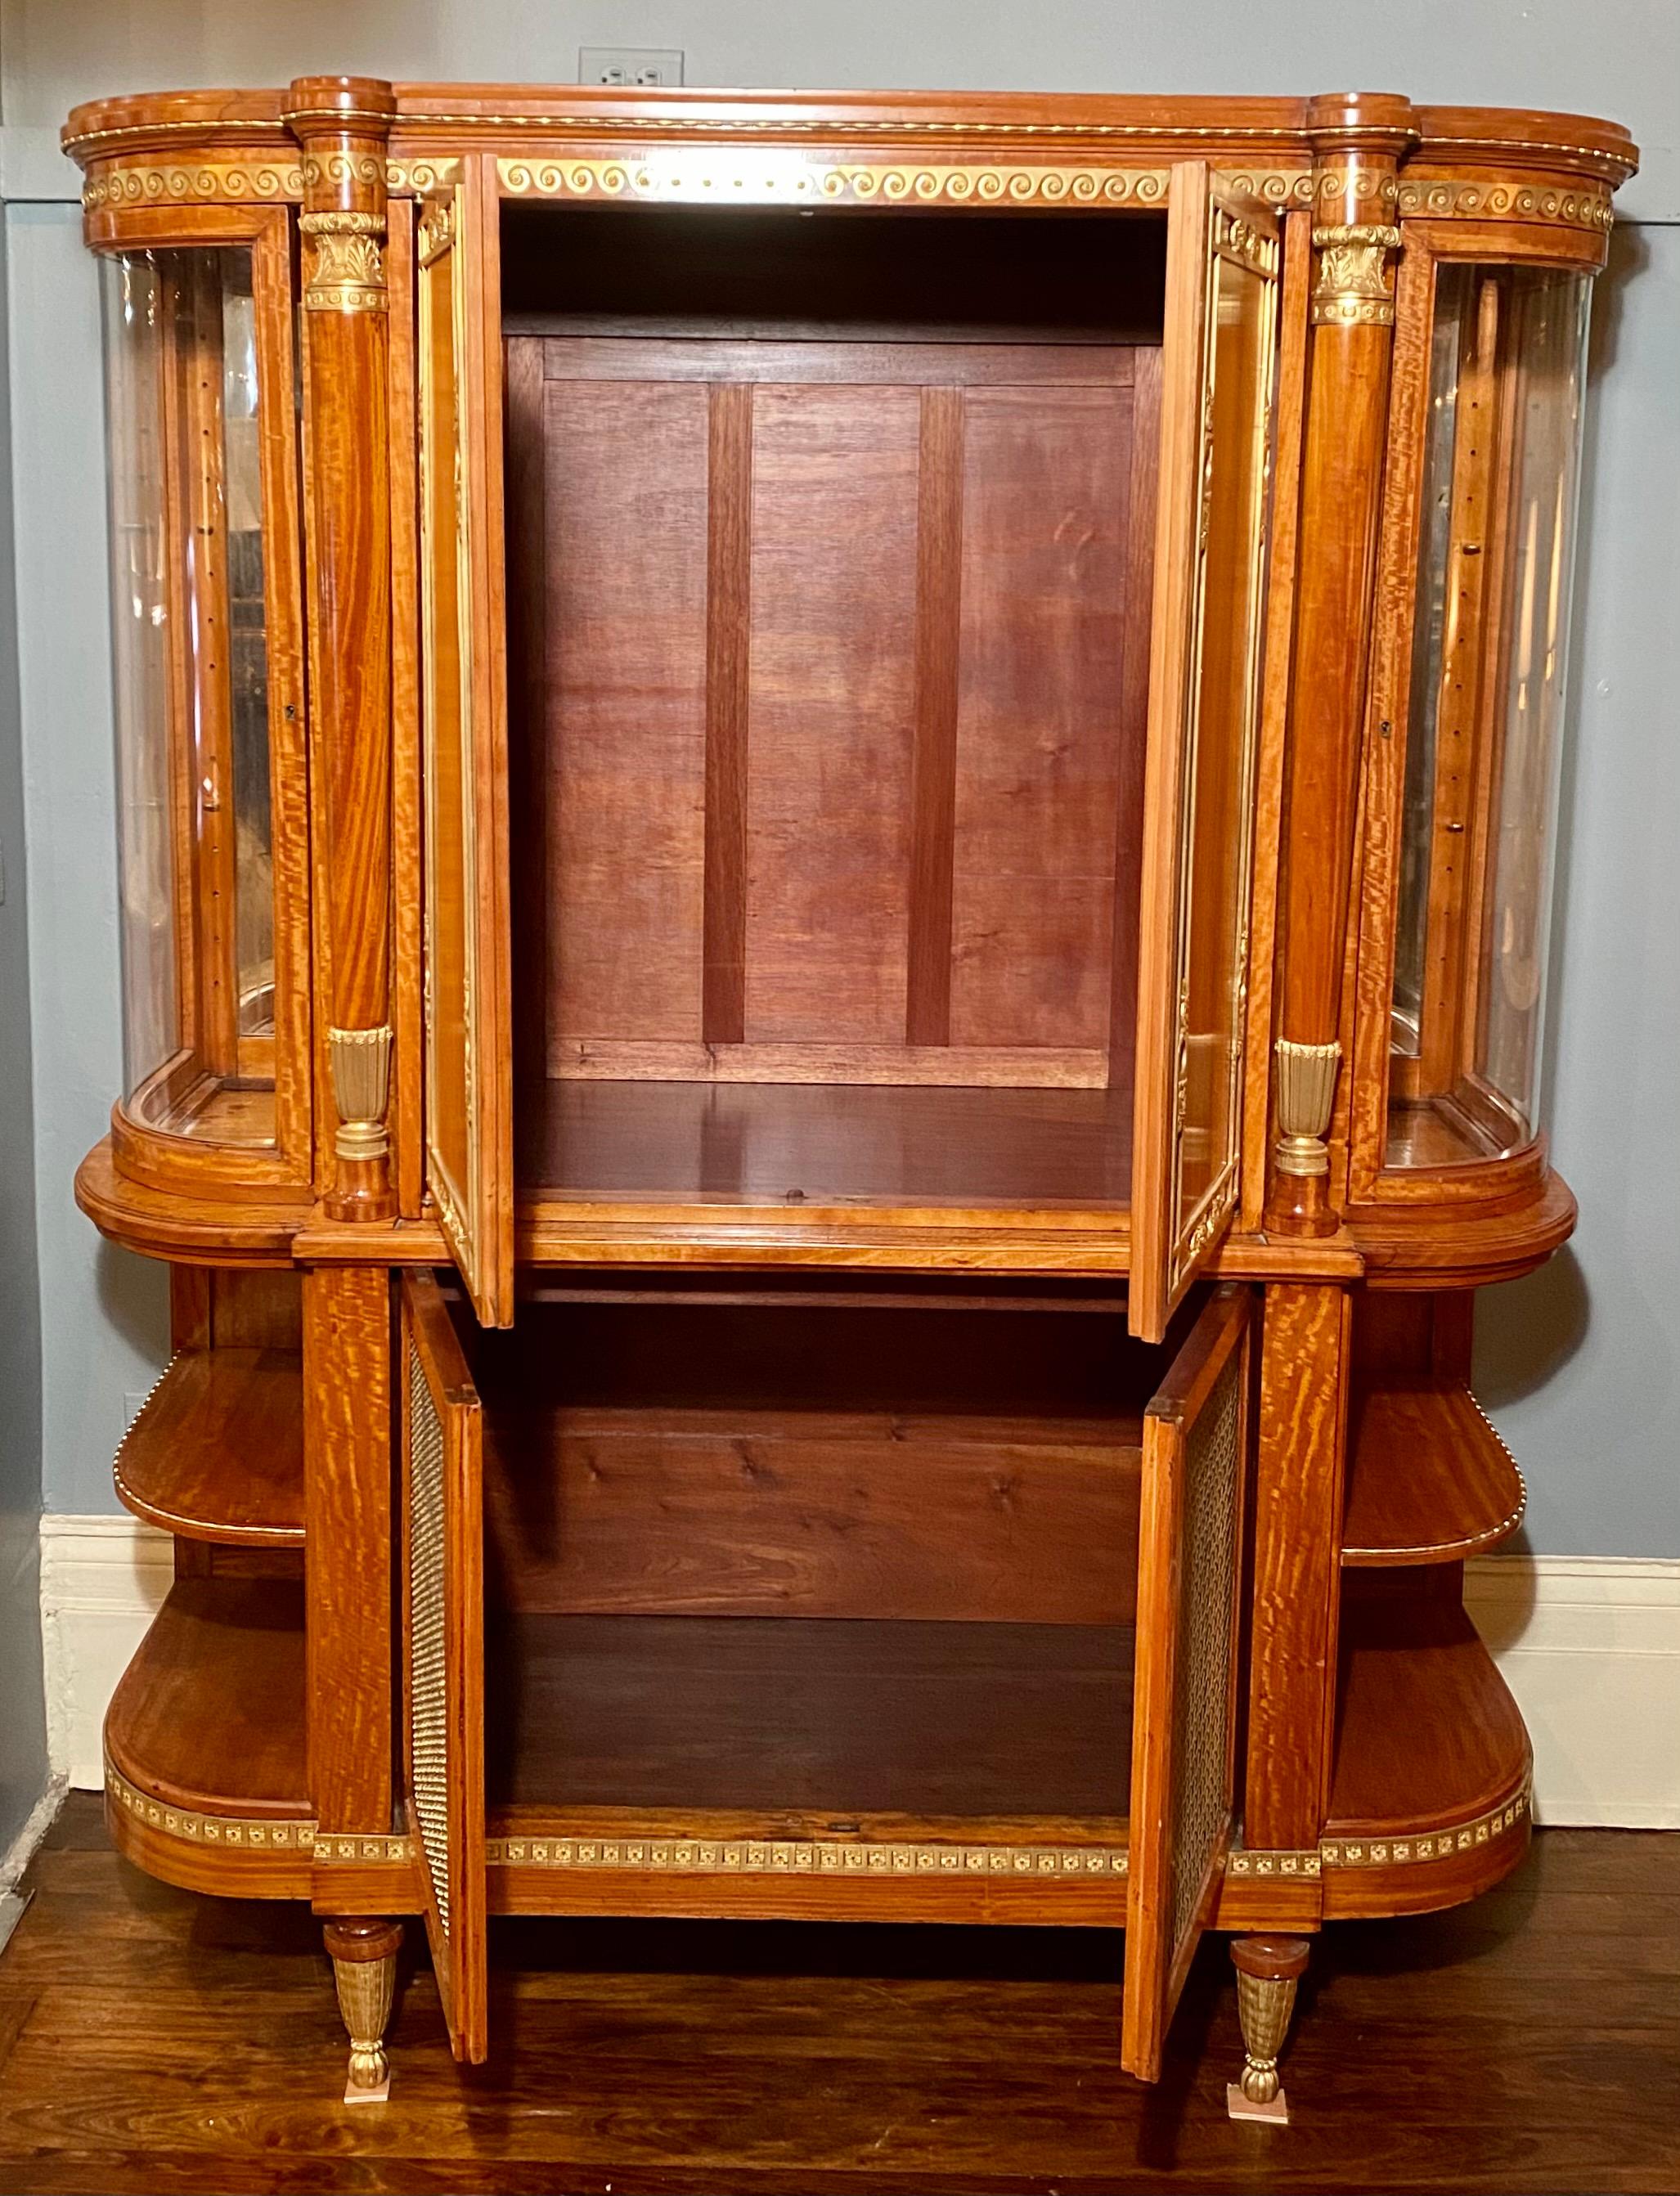 Antique French satinwood cabinet with bronze doré mounts, circa 1880.
 